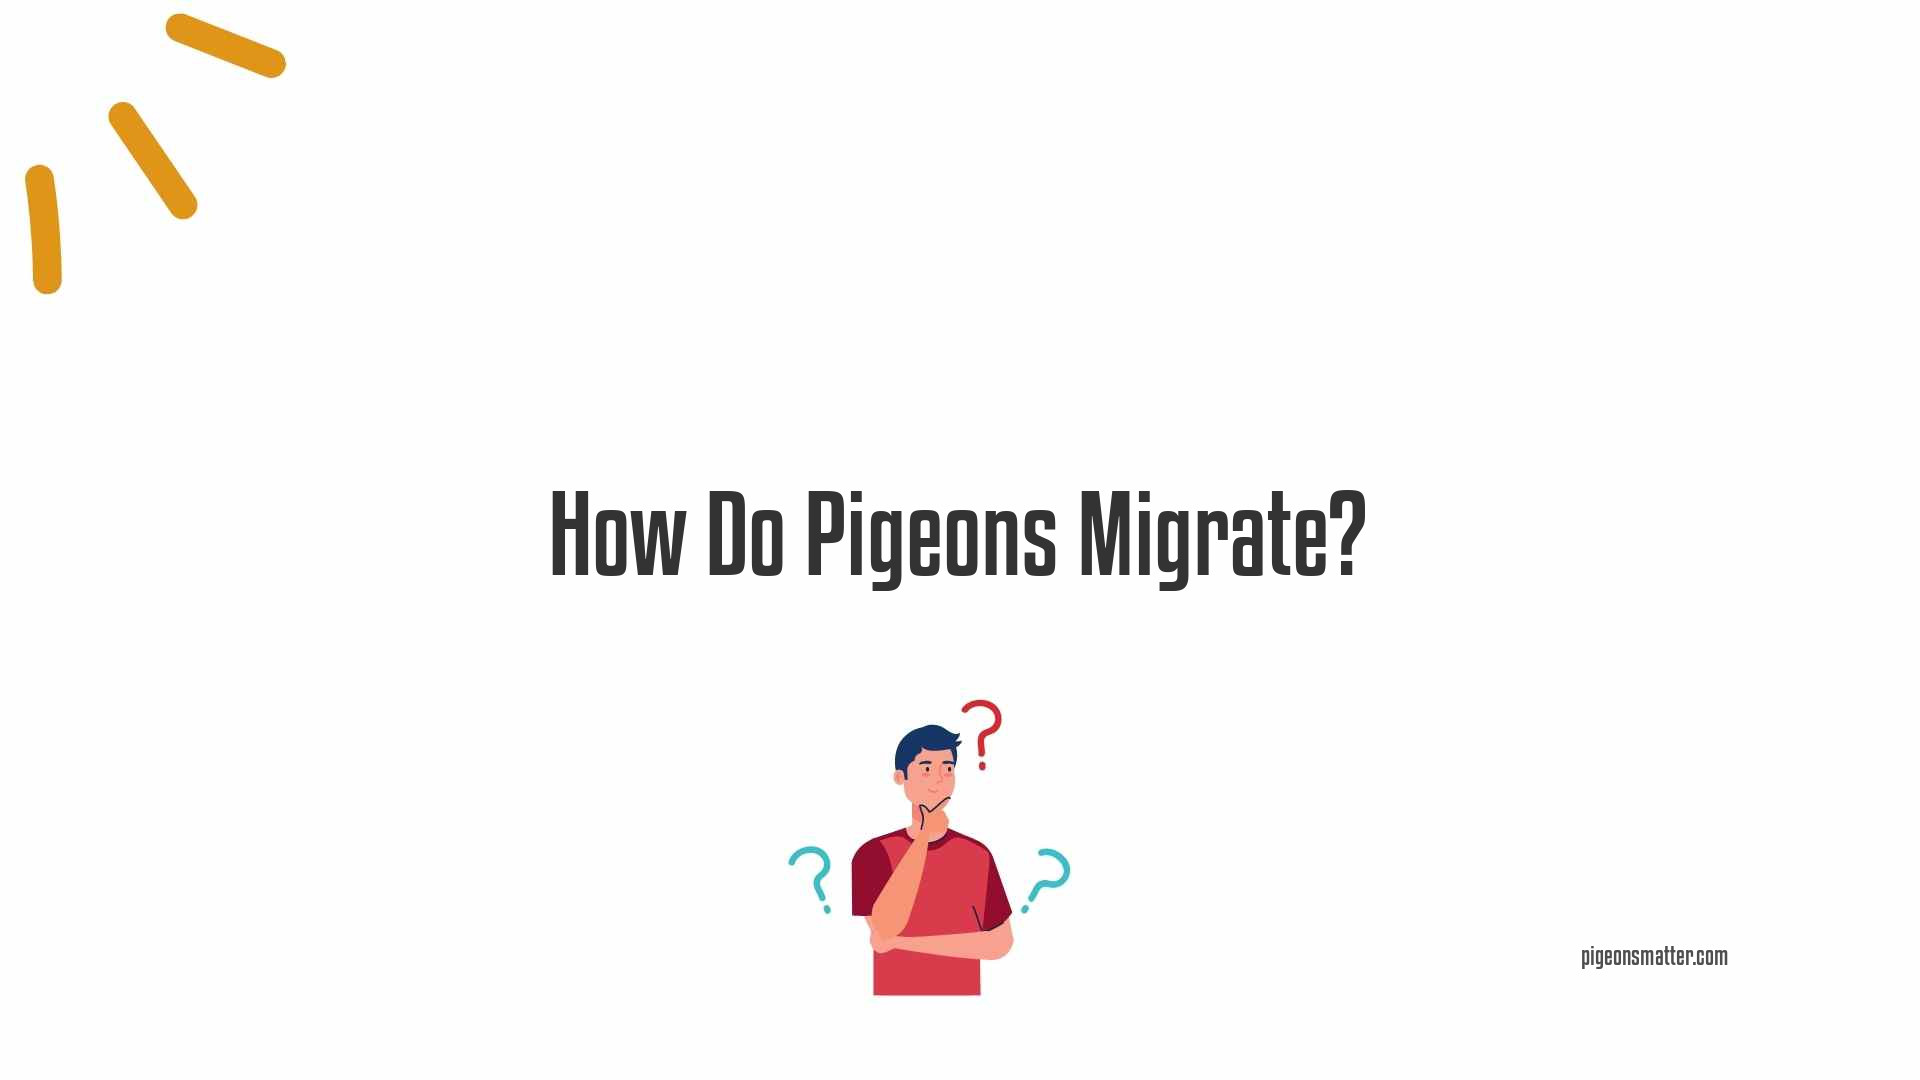 How Do Pigeons Migrate?